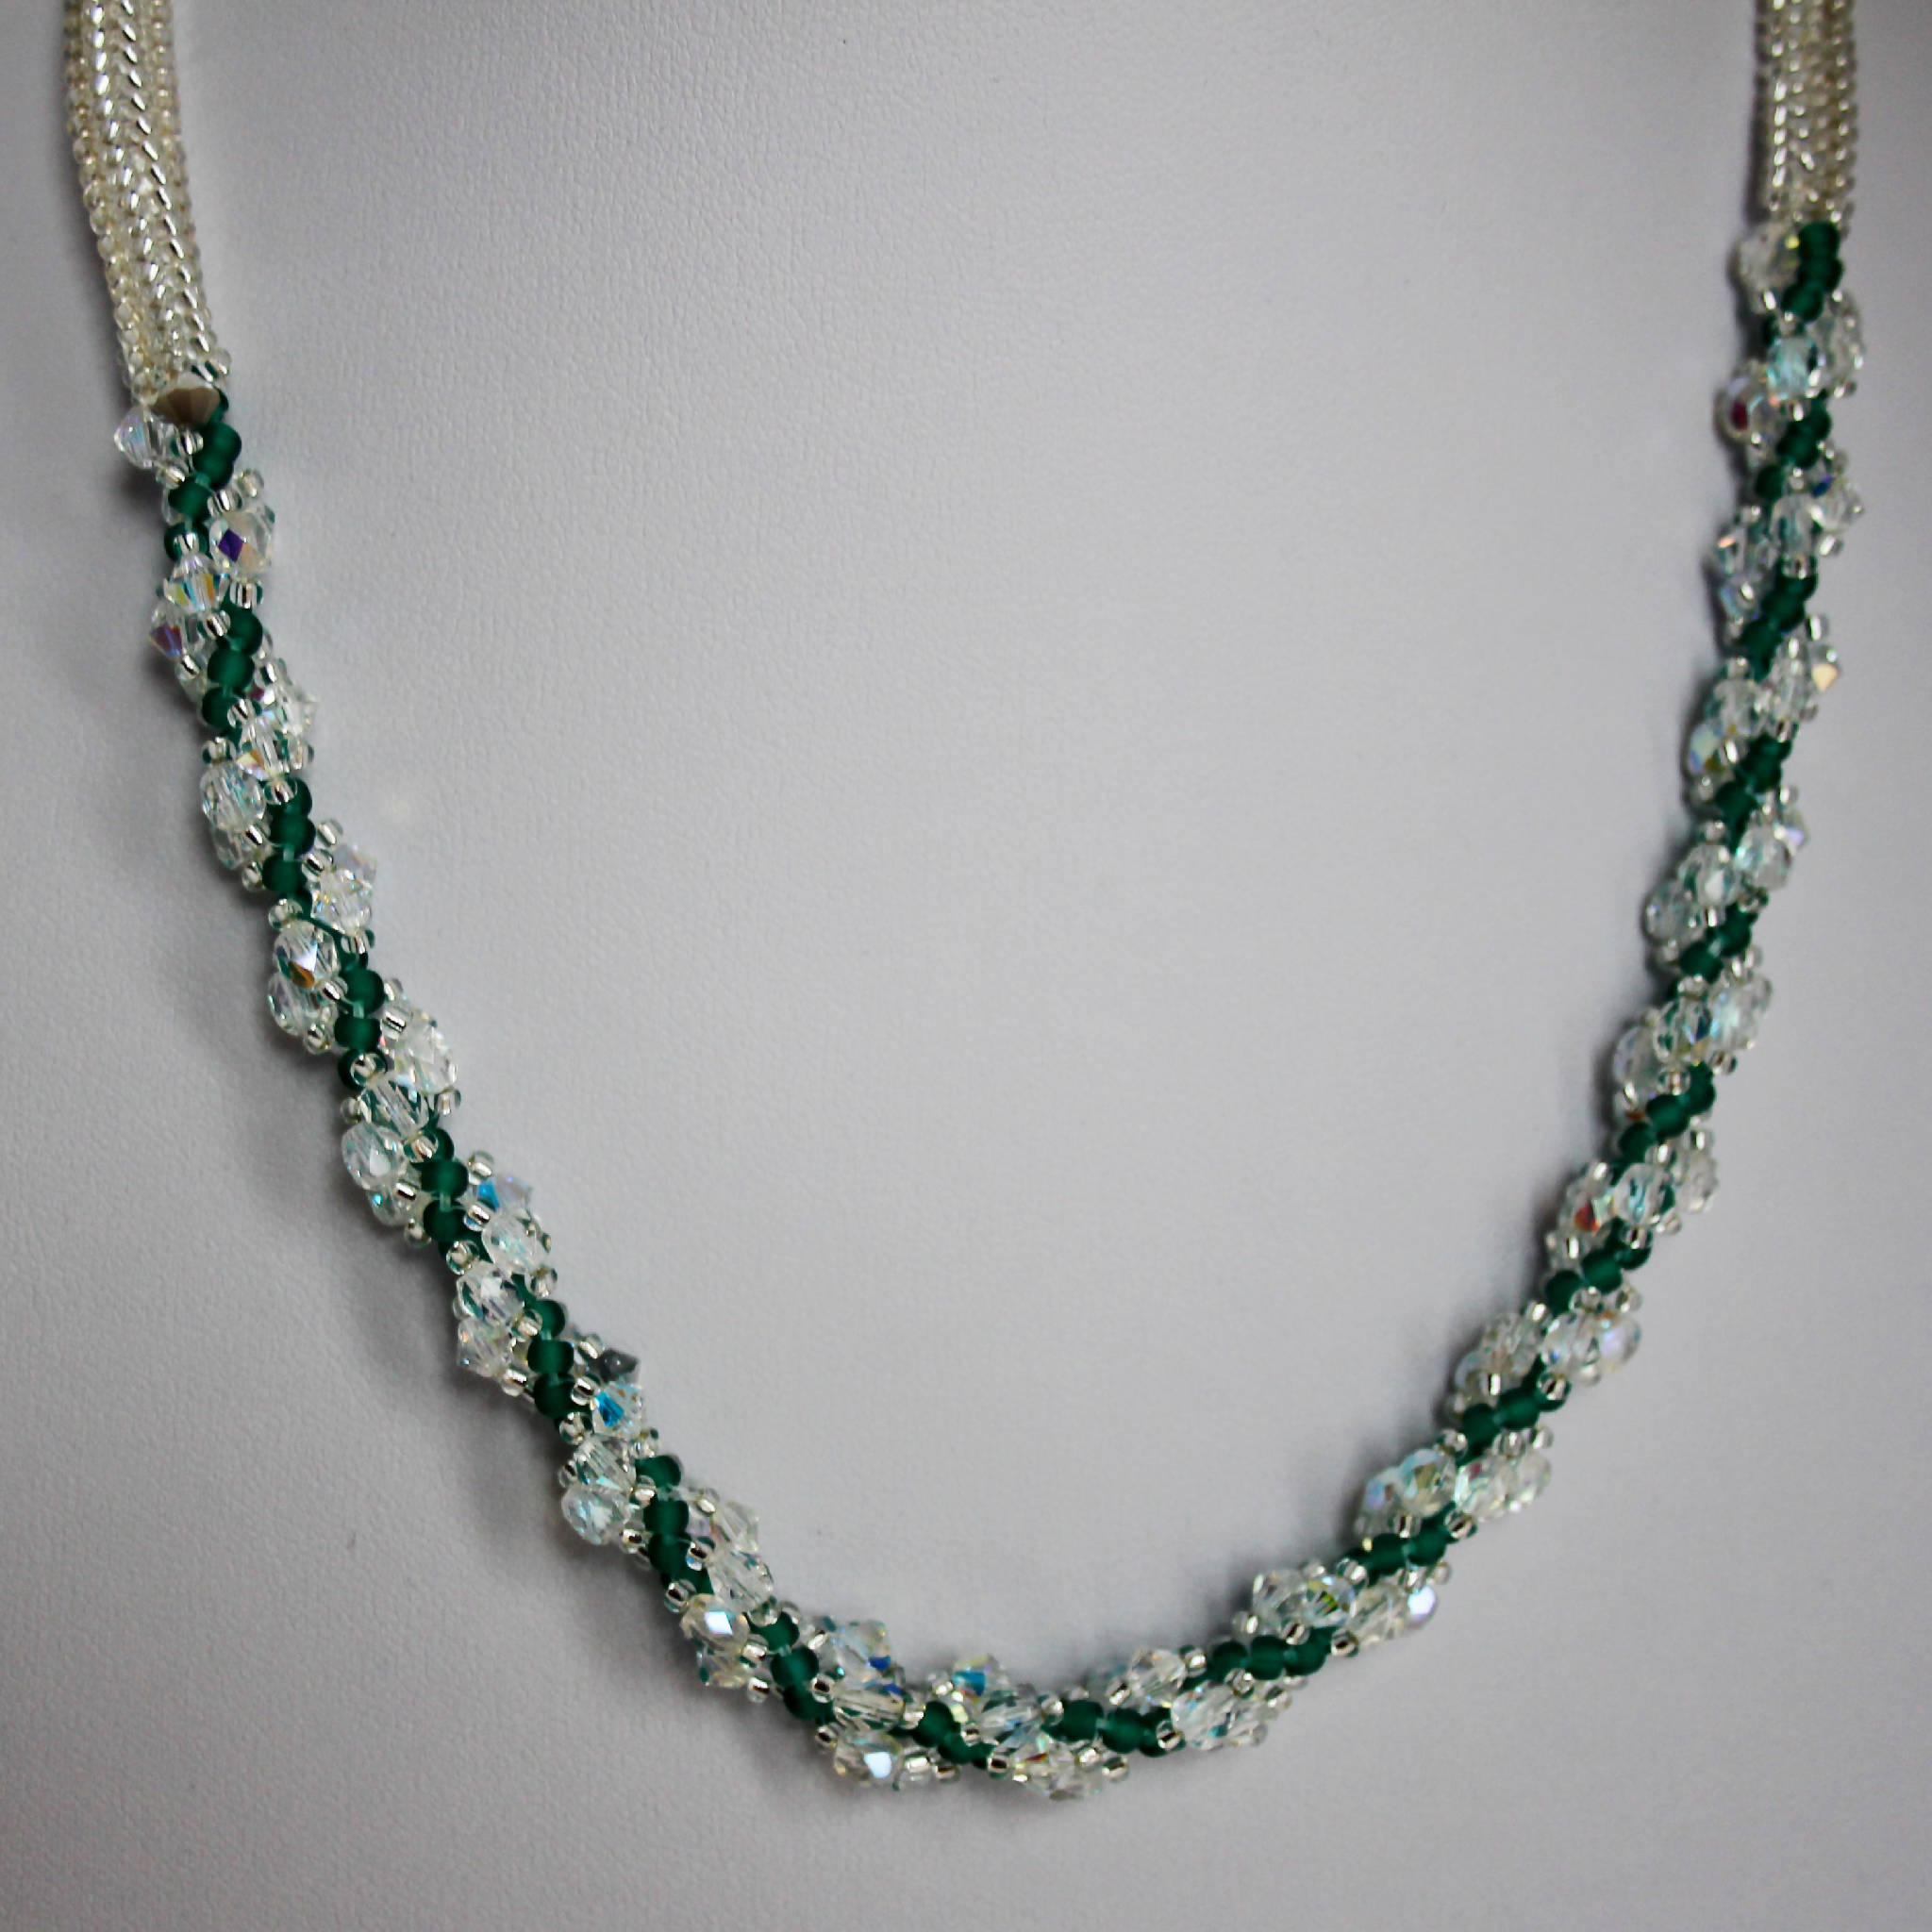 Crystal Spiral Rope Necklace (122)